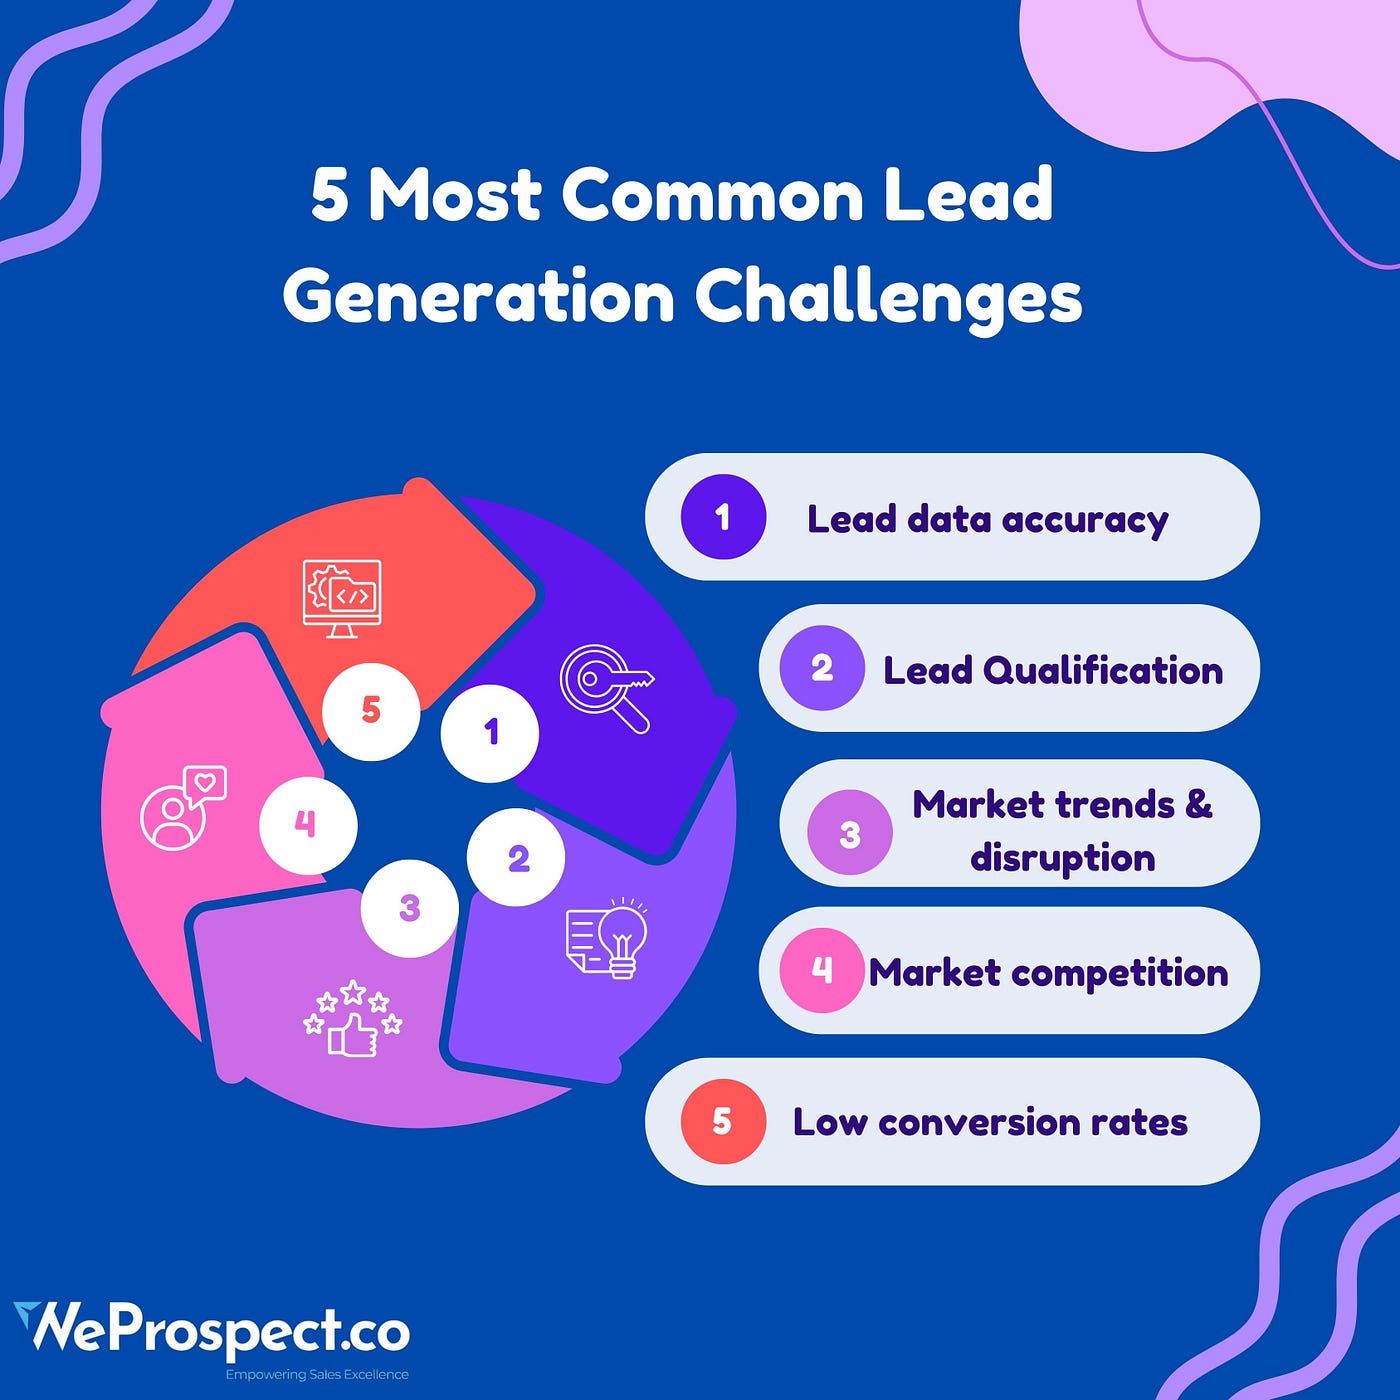 5 Most Common Lead Generation Challenges | by WeProspect.co | Medium